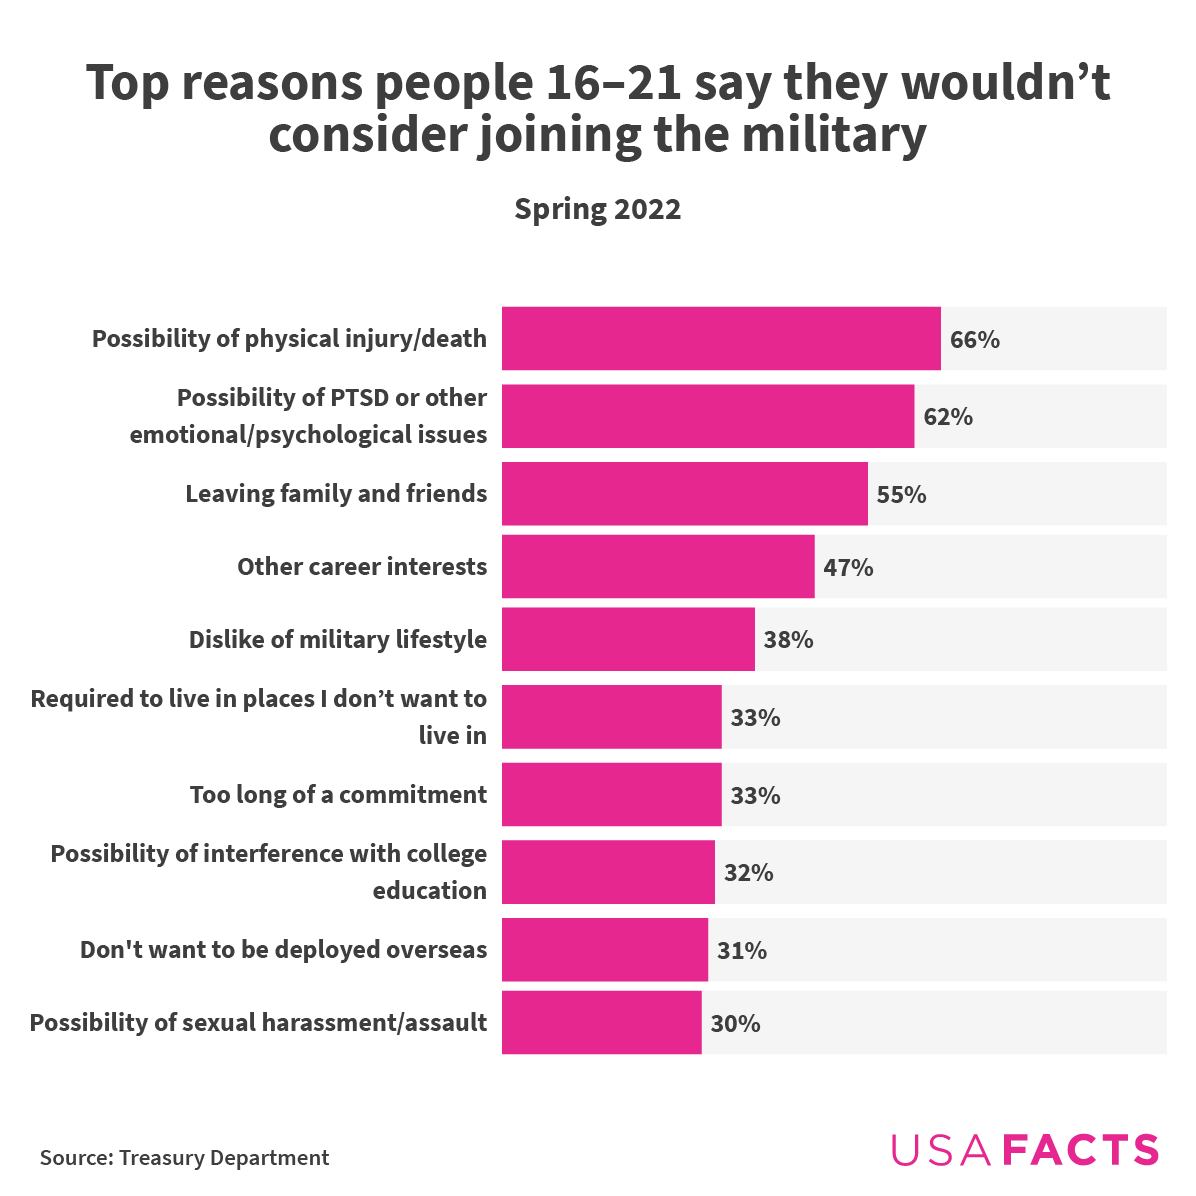 66% of respondents ages 16 to 21 say the possibility of death or injury is their top reason for not joining the military